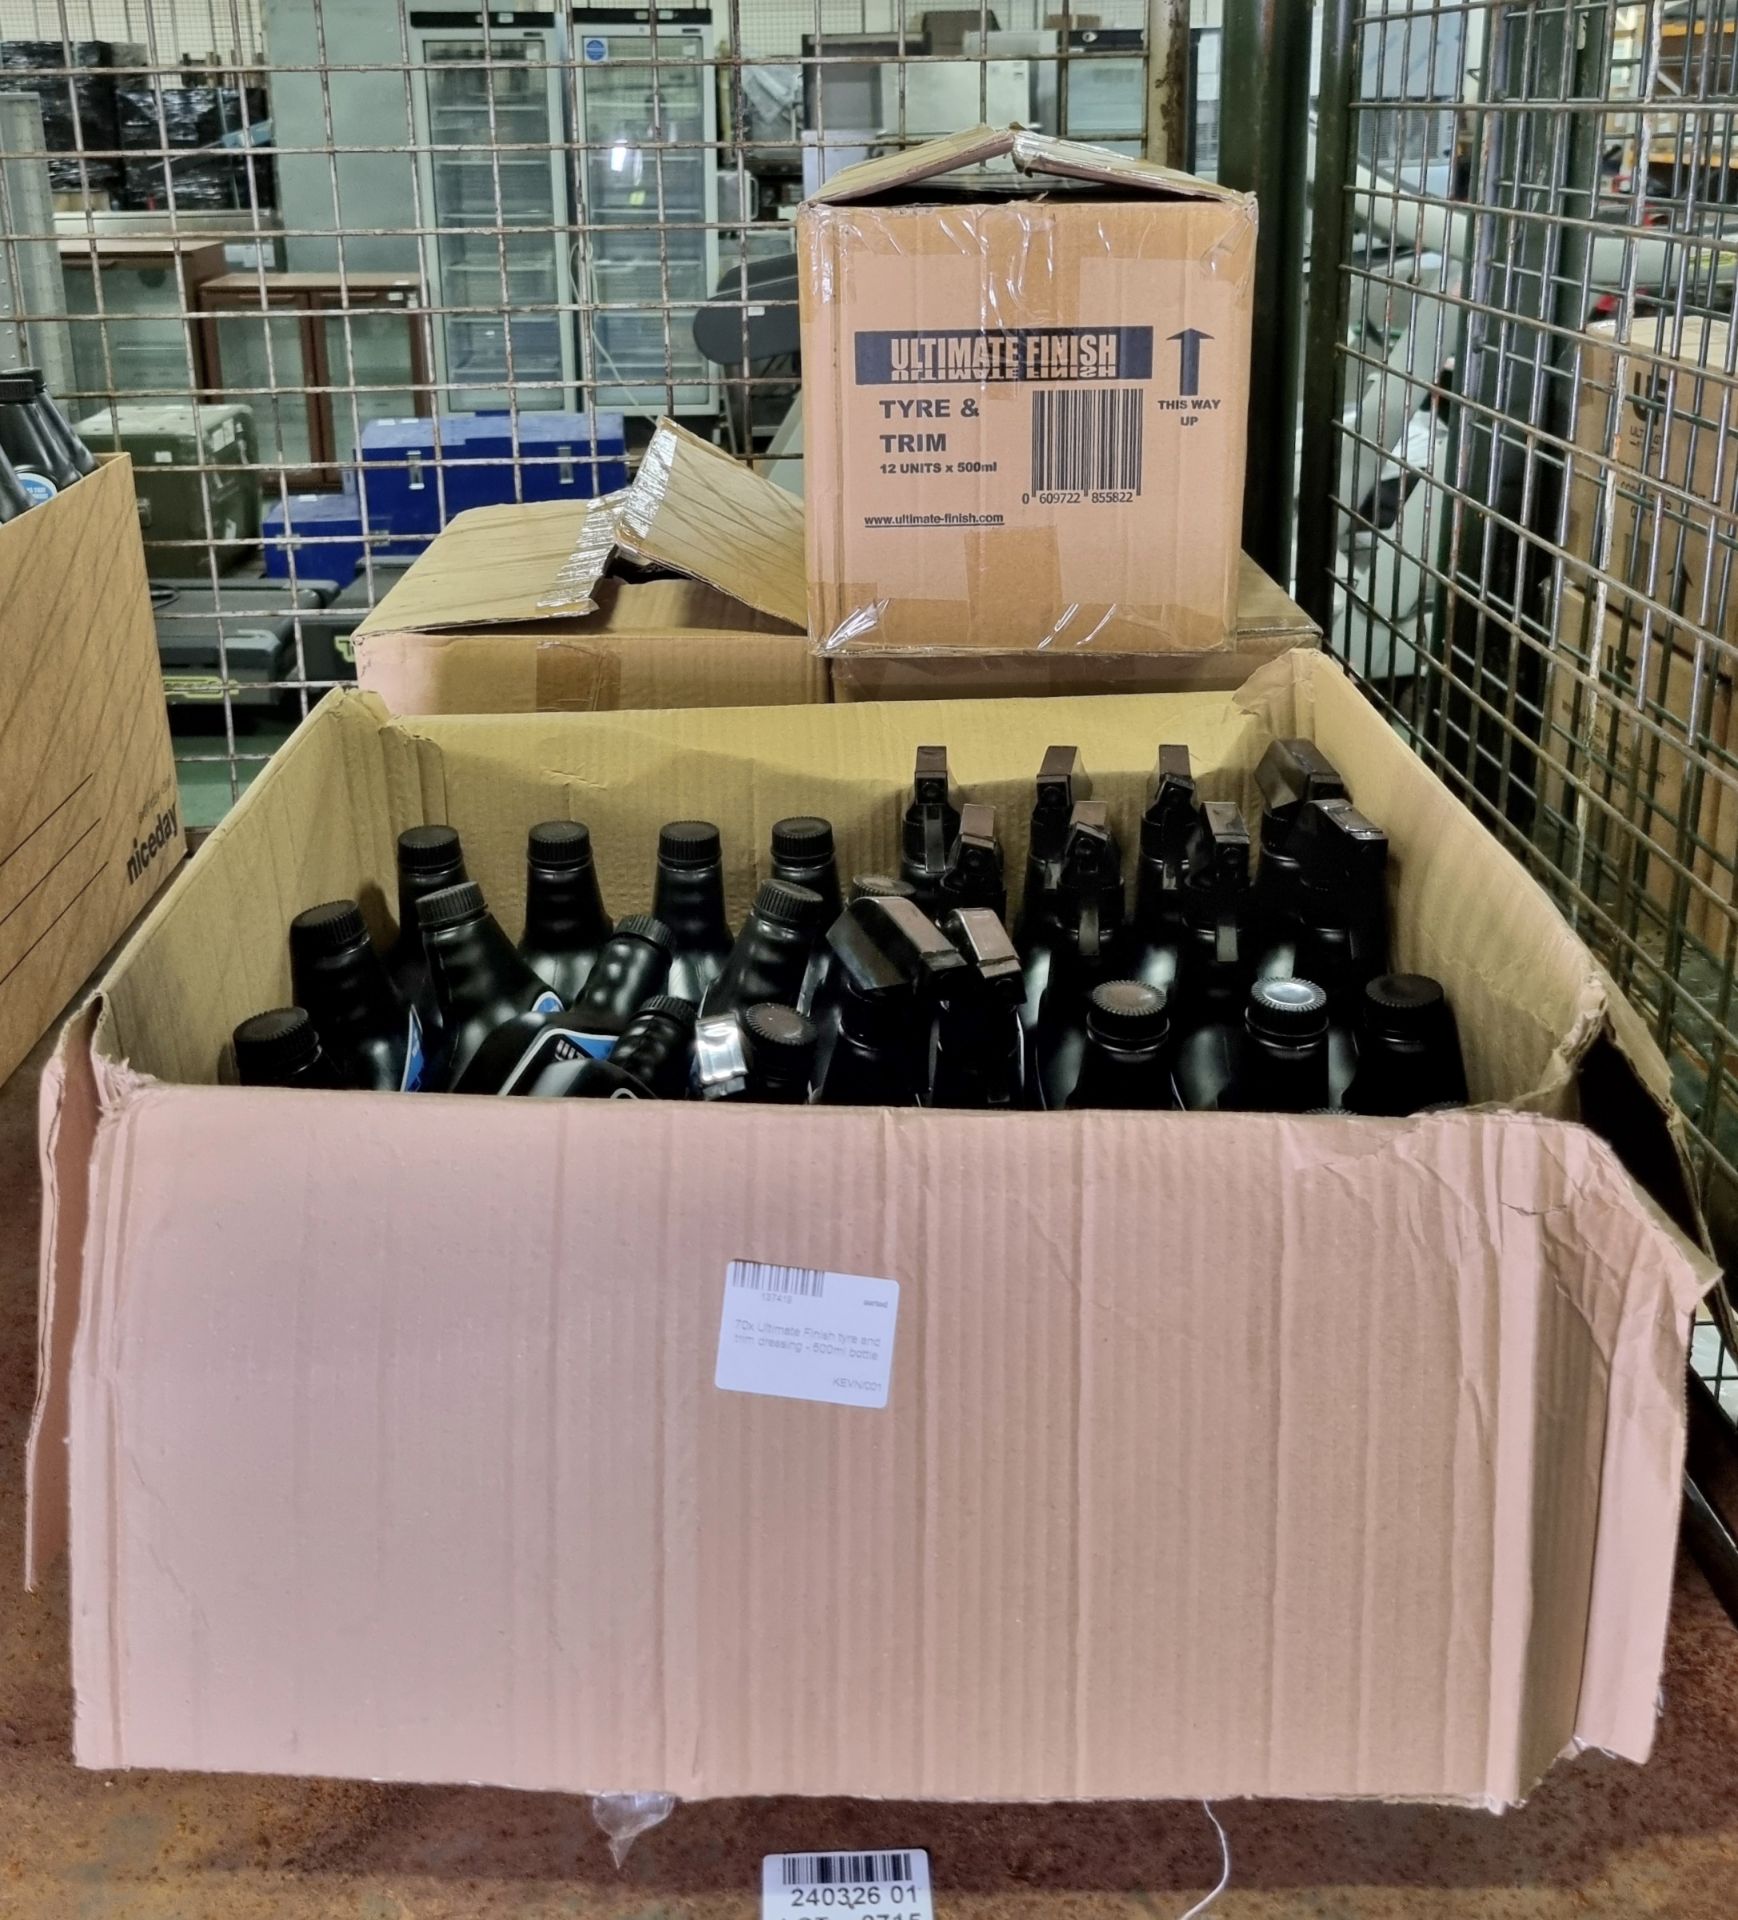 70x bottles of Ultimate Finish tyre and trim dressing - 500ml - Image 2 of 2